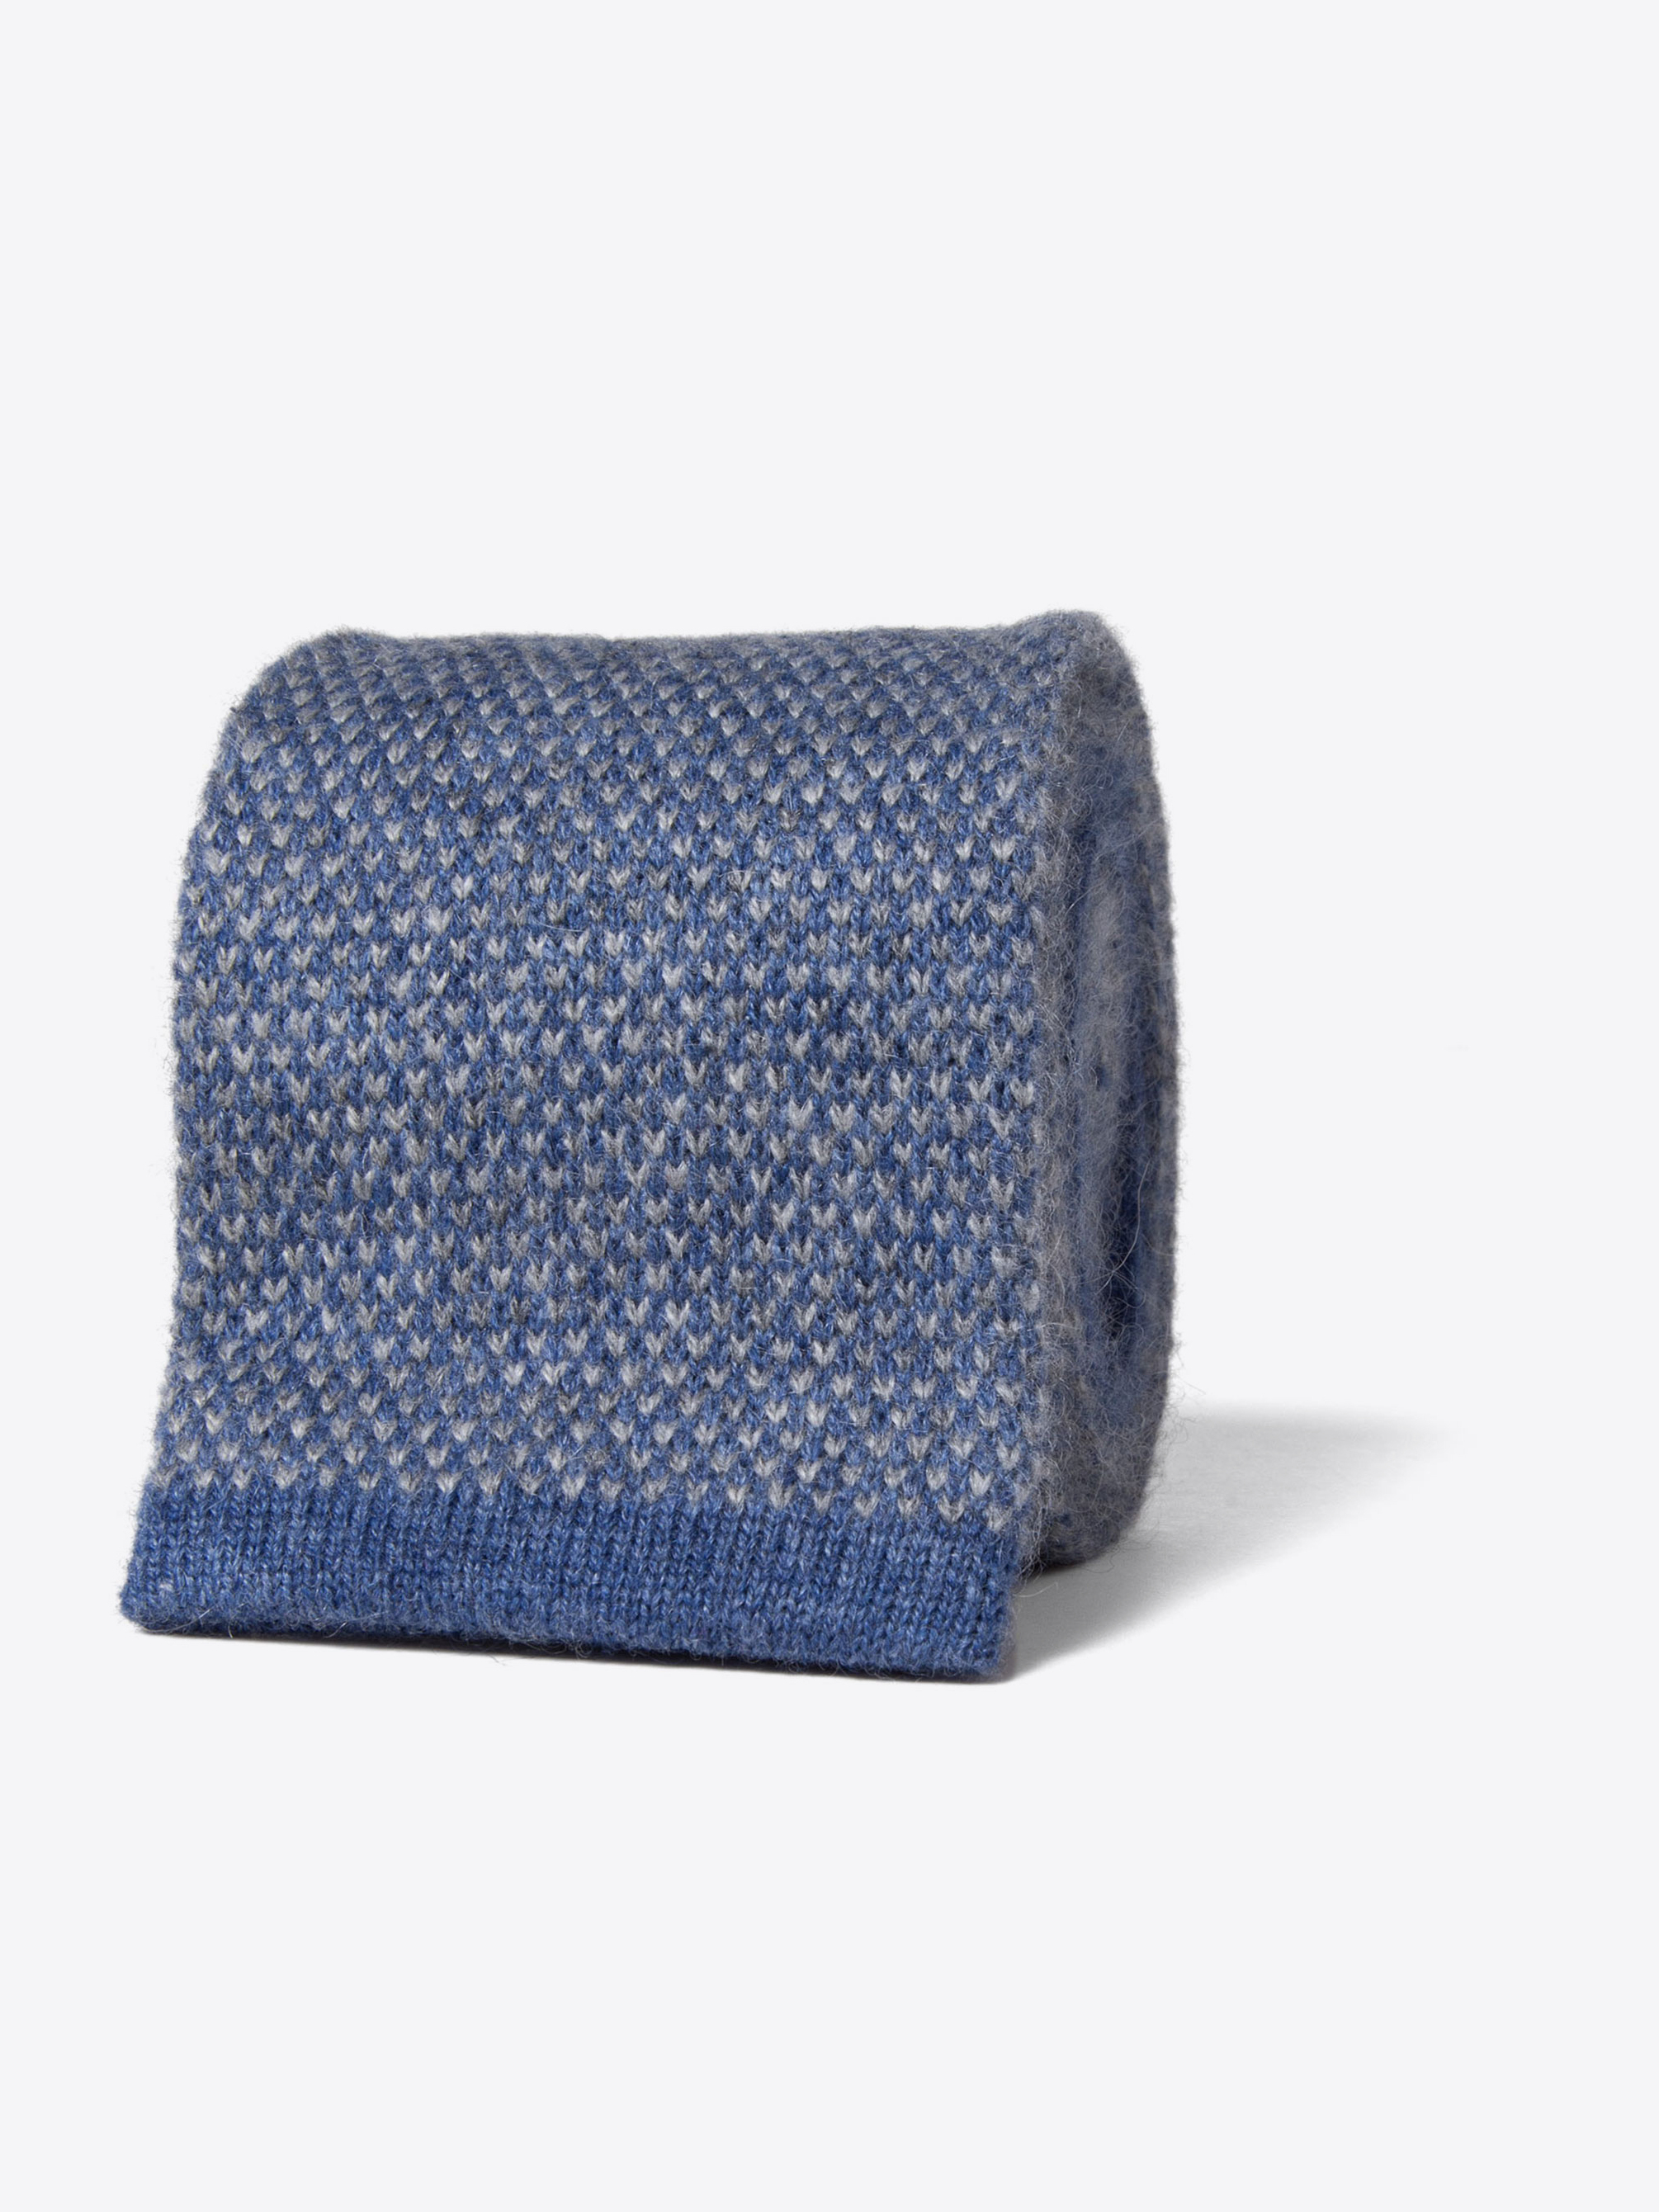 Zoom Image of Torino Blue Cashmere Knit Tie